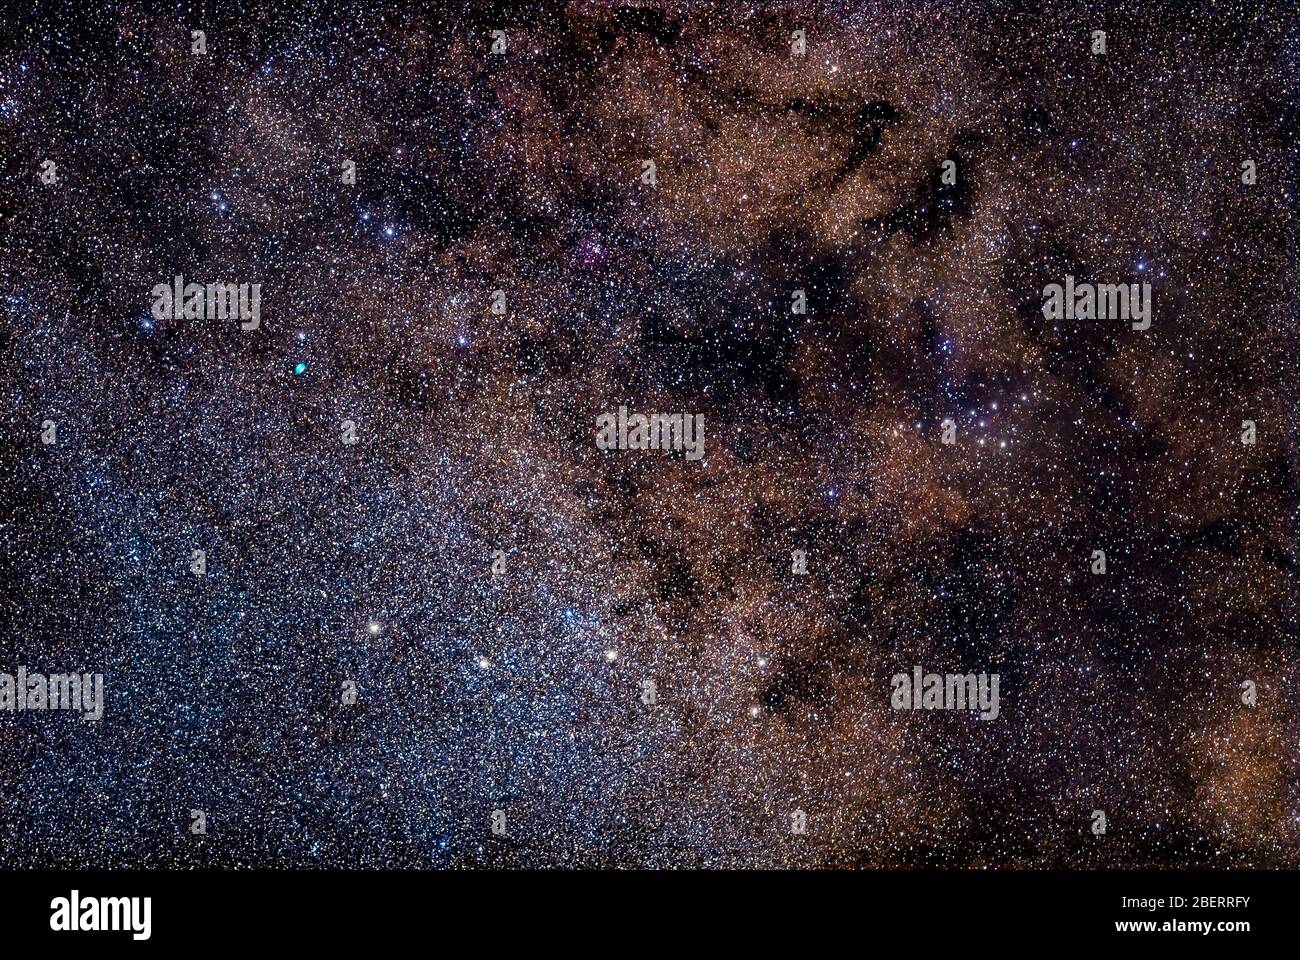 Region of Milky Way with the Dumbbell Nebula, Coathanger asterism and other celestial objects . Stock Photo